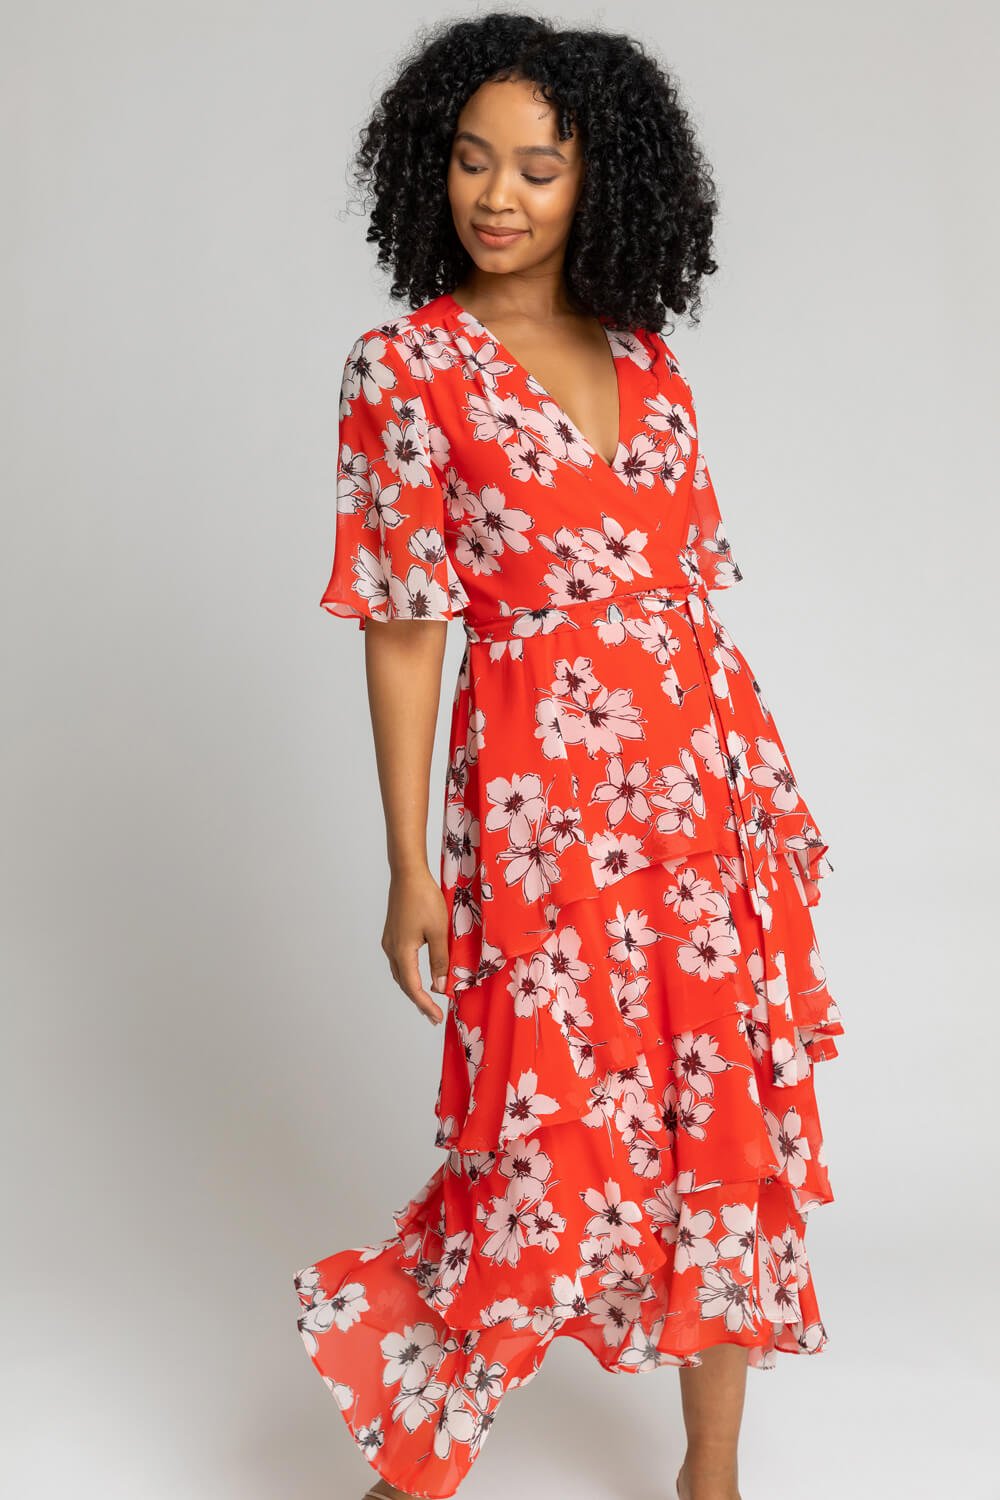 Red Petite Floral Print Tiered Frill Dress, Image 1 of 5